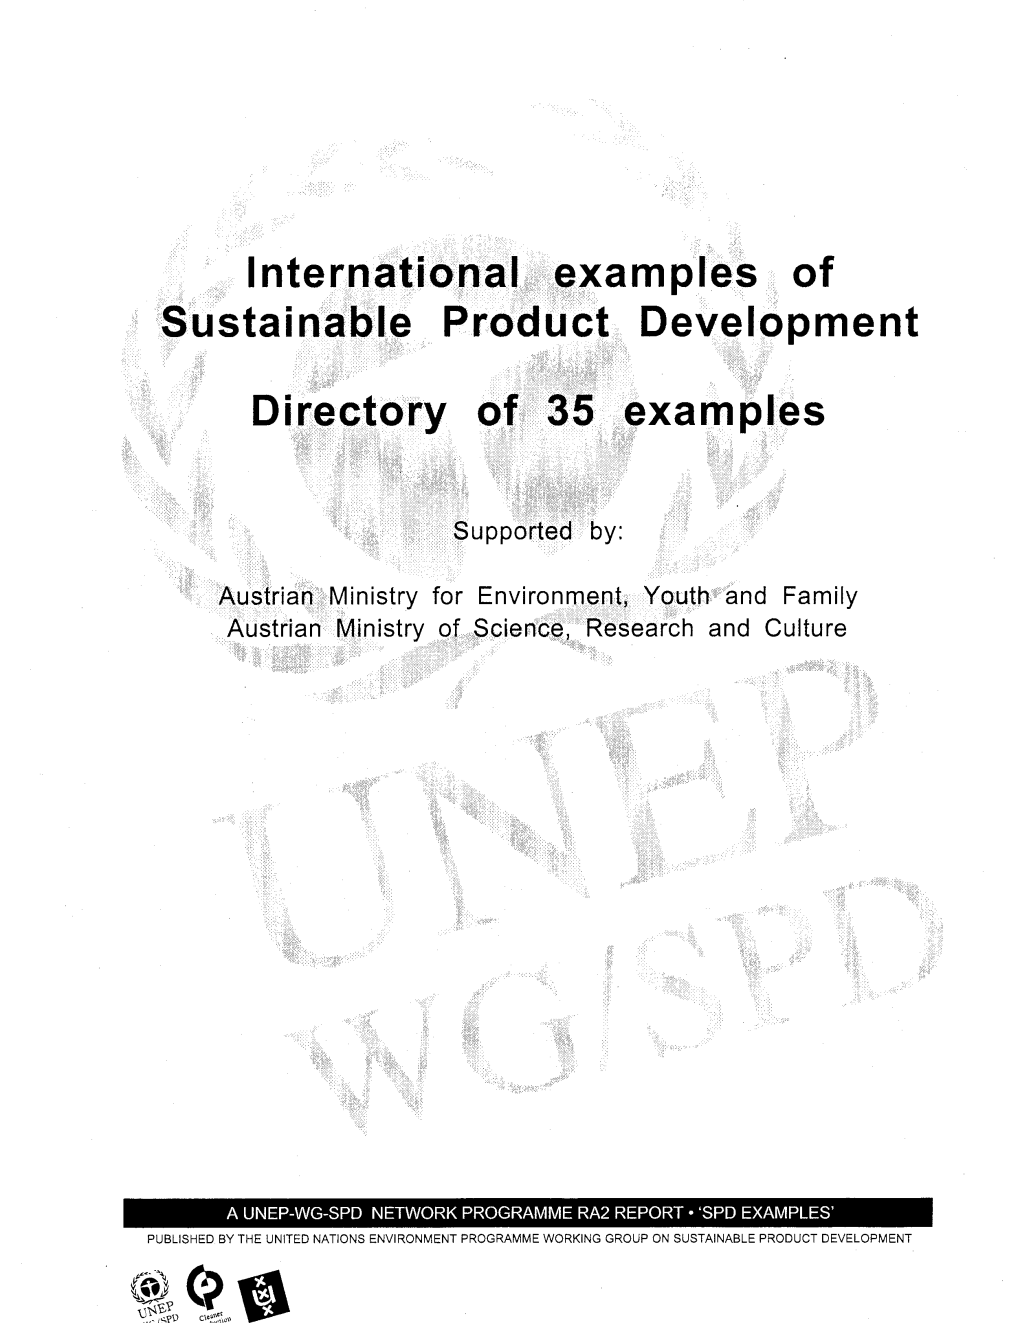 International Examples of Sustainable Product Development